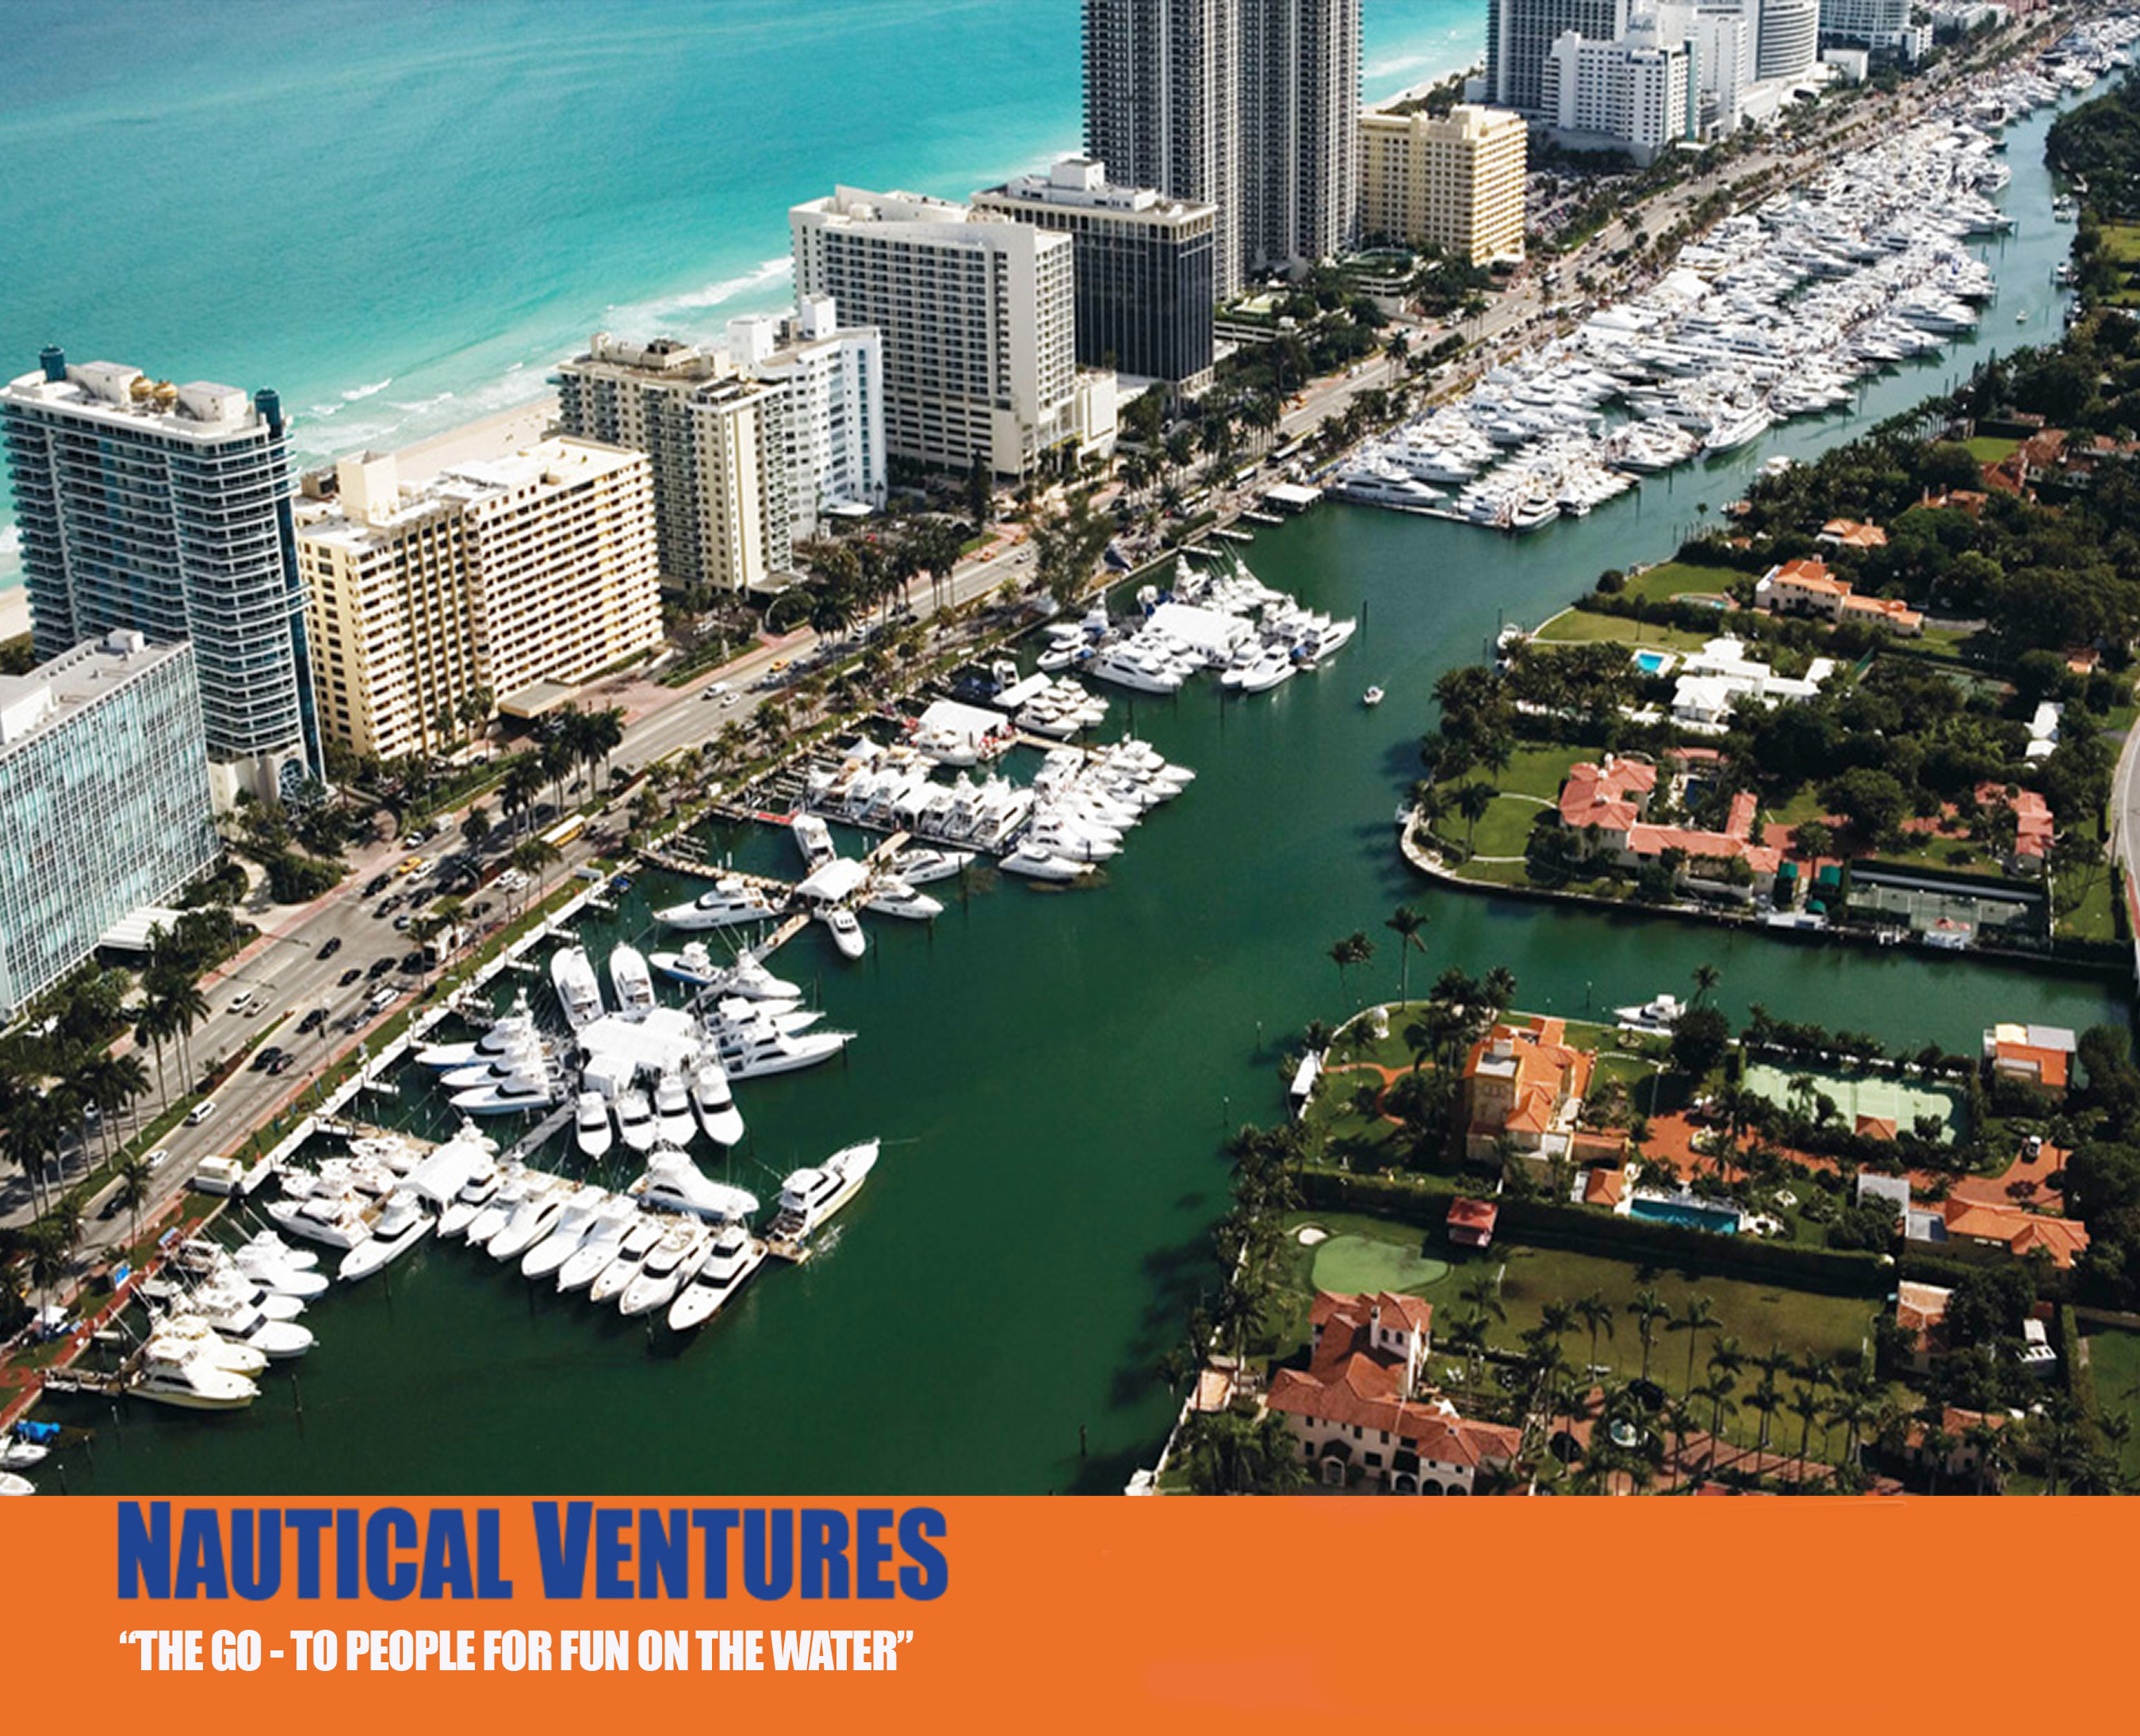 YMB17: Captains, brokers view Yachts Miami Beach with patience, optimism